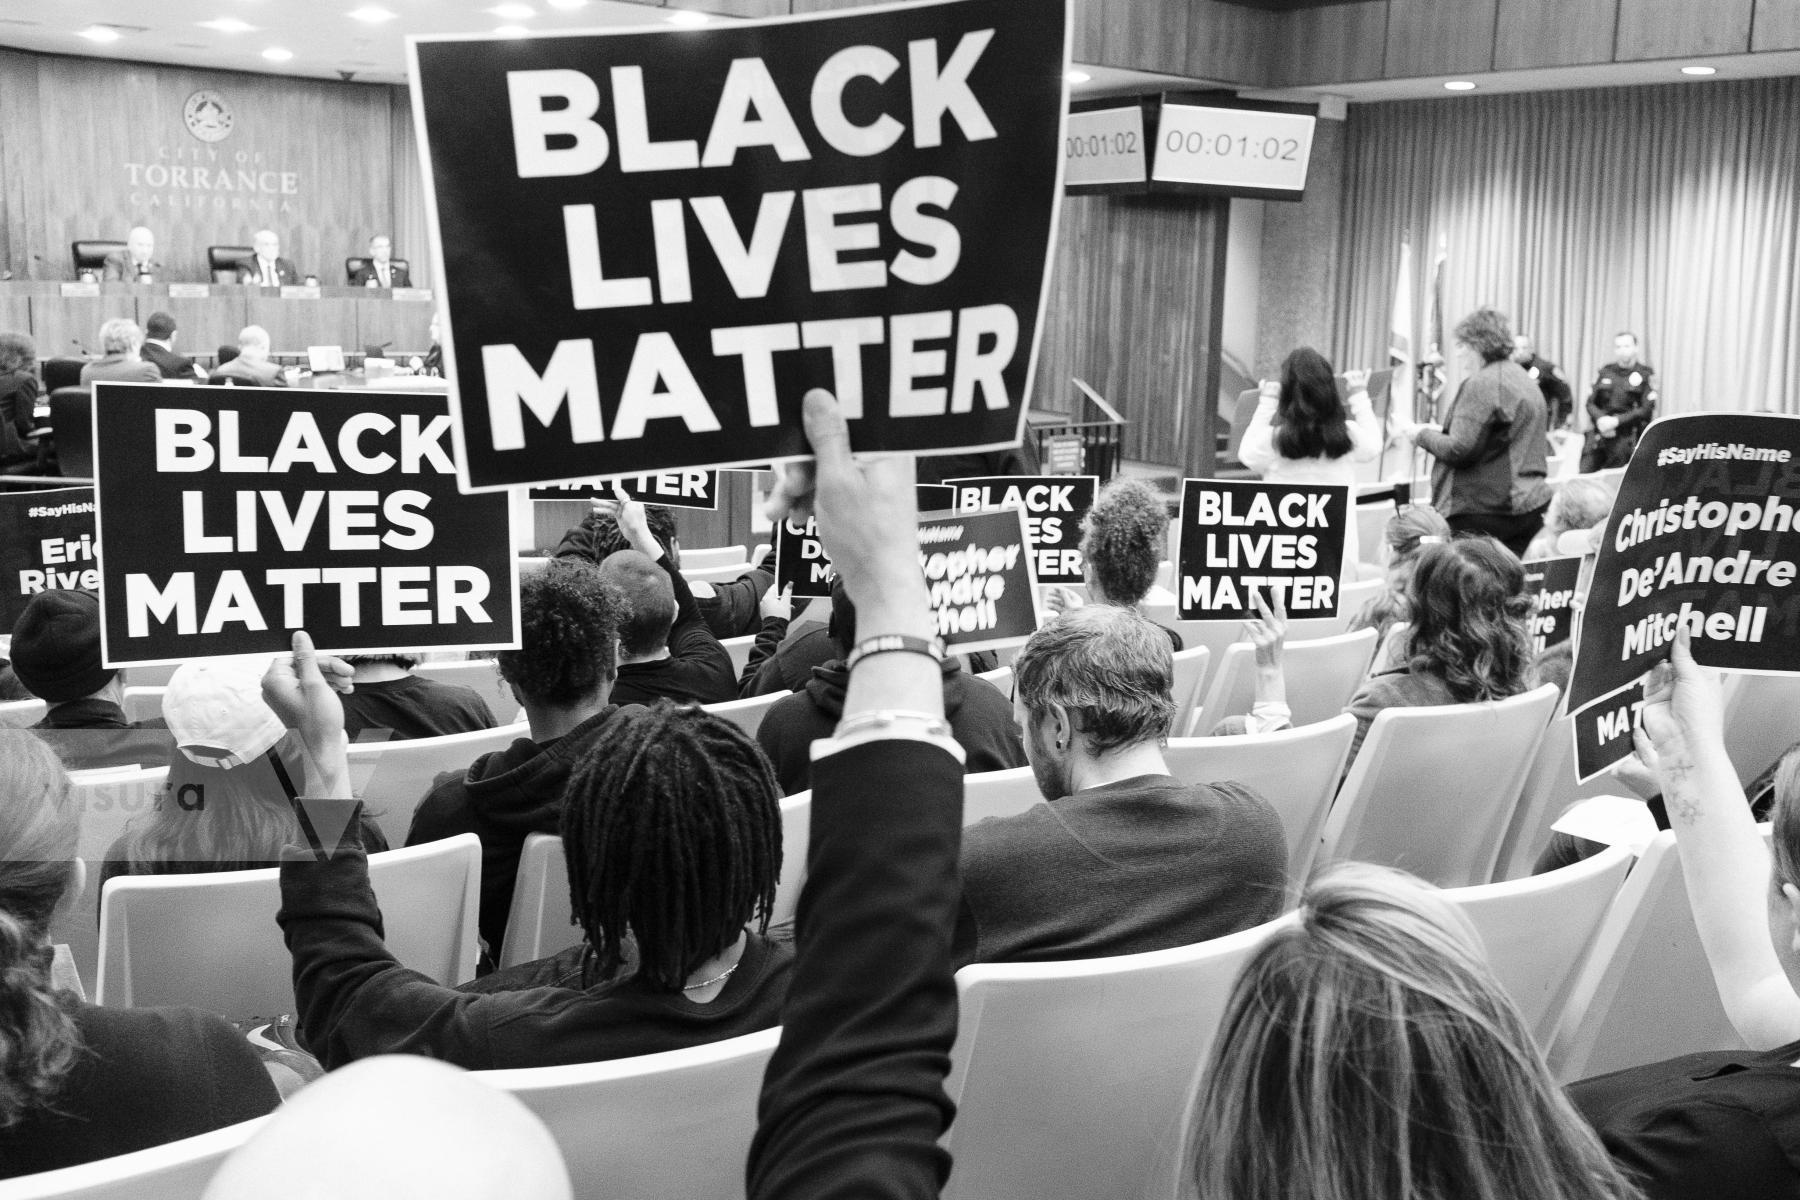 Purchase BLM at Torrance City Council for Christopher De'Andre Mitchell, 2019 by J. Matt